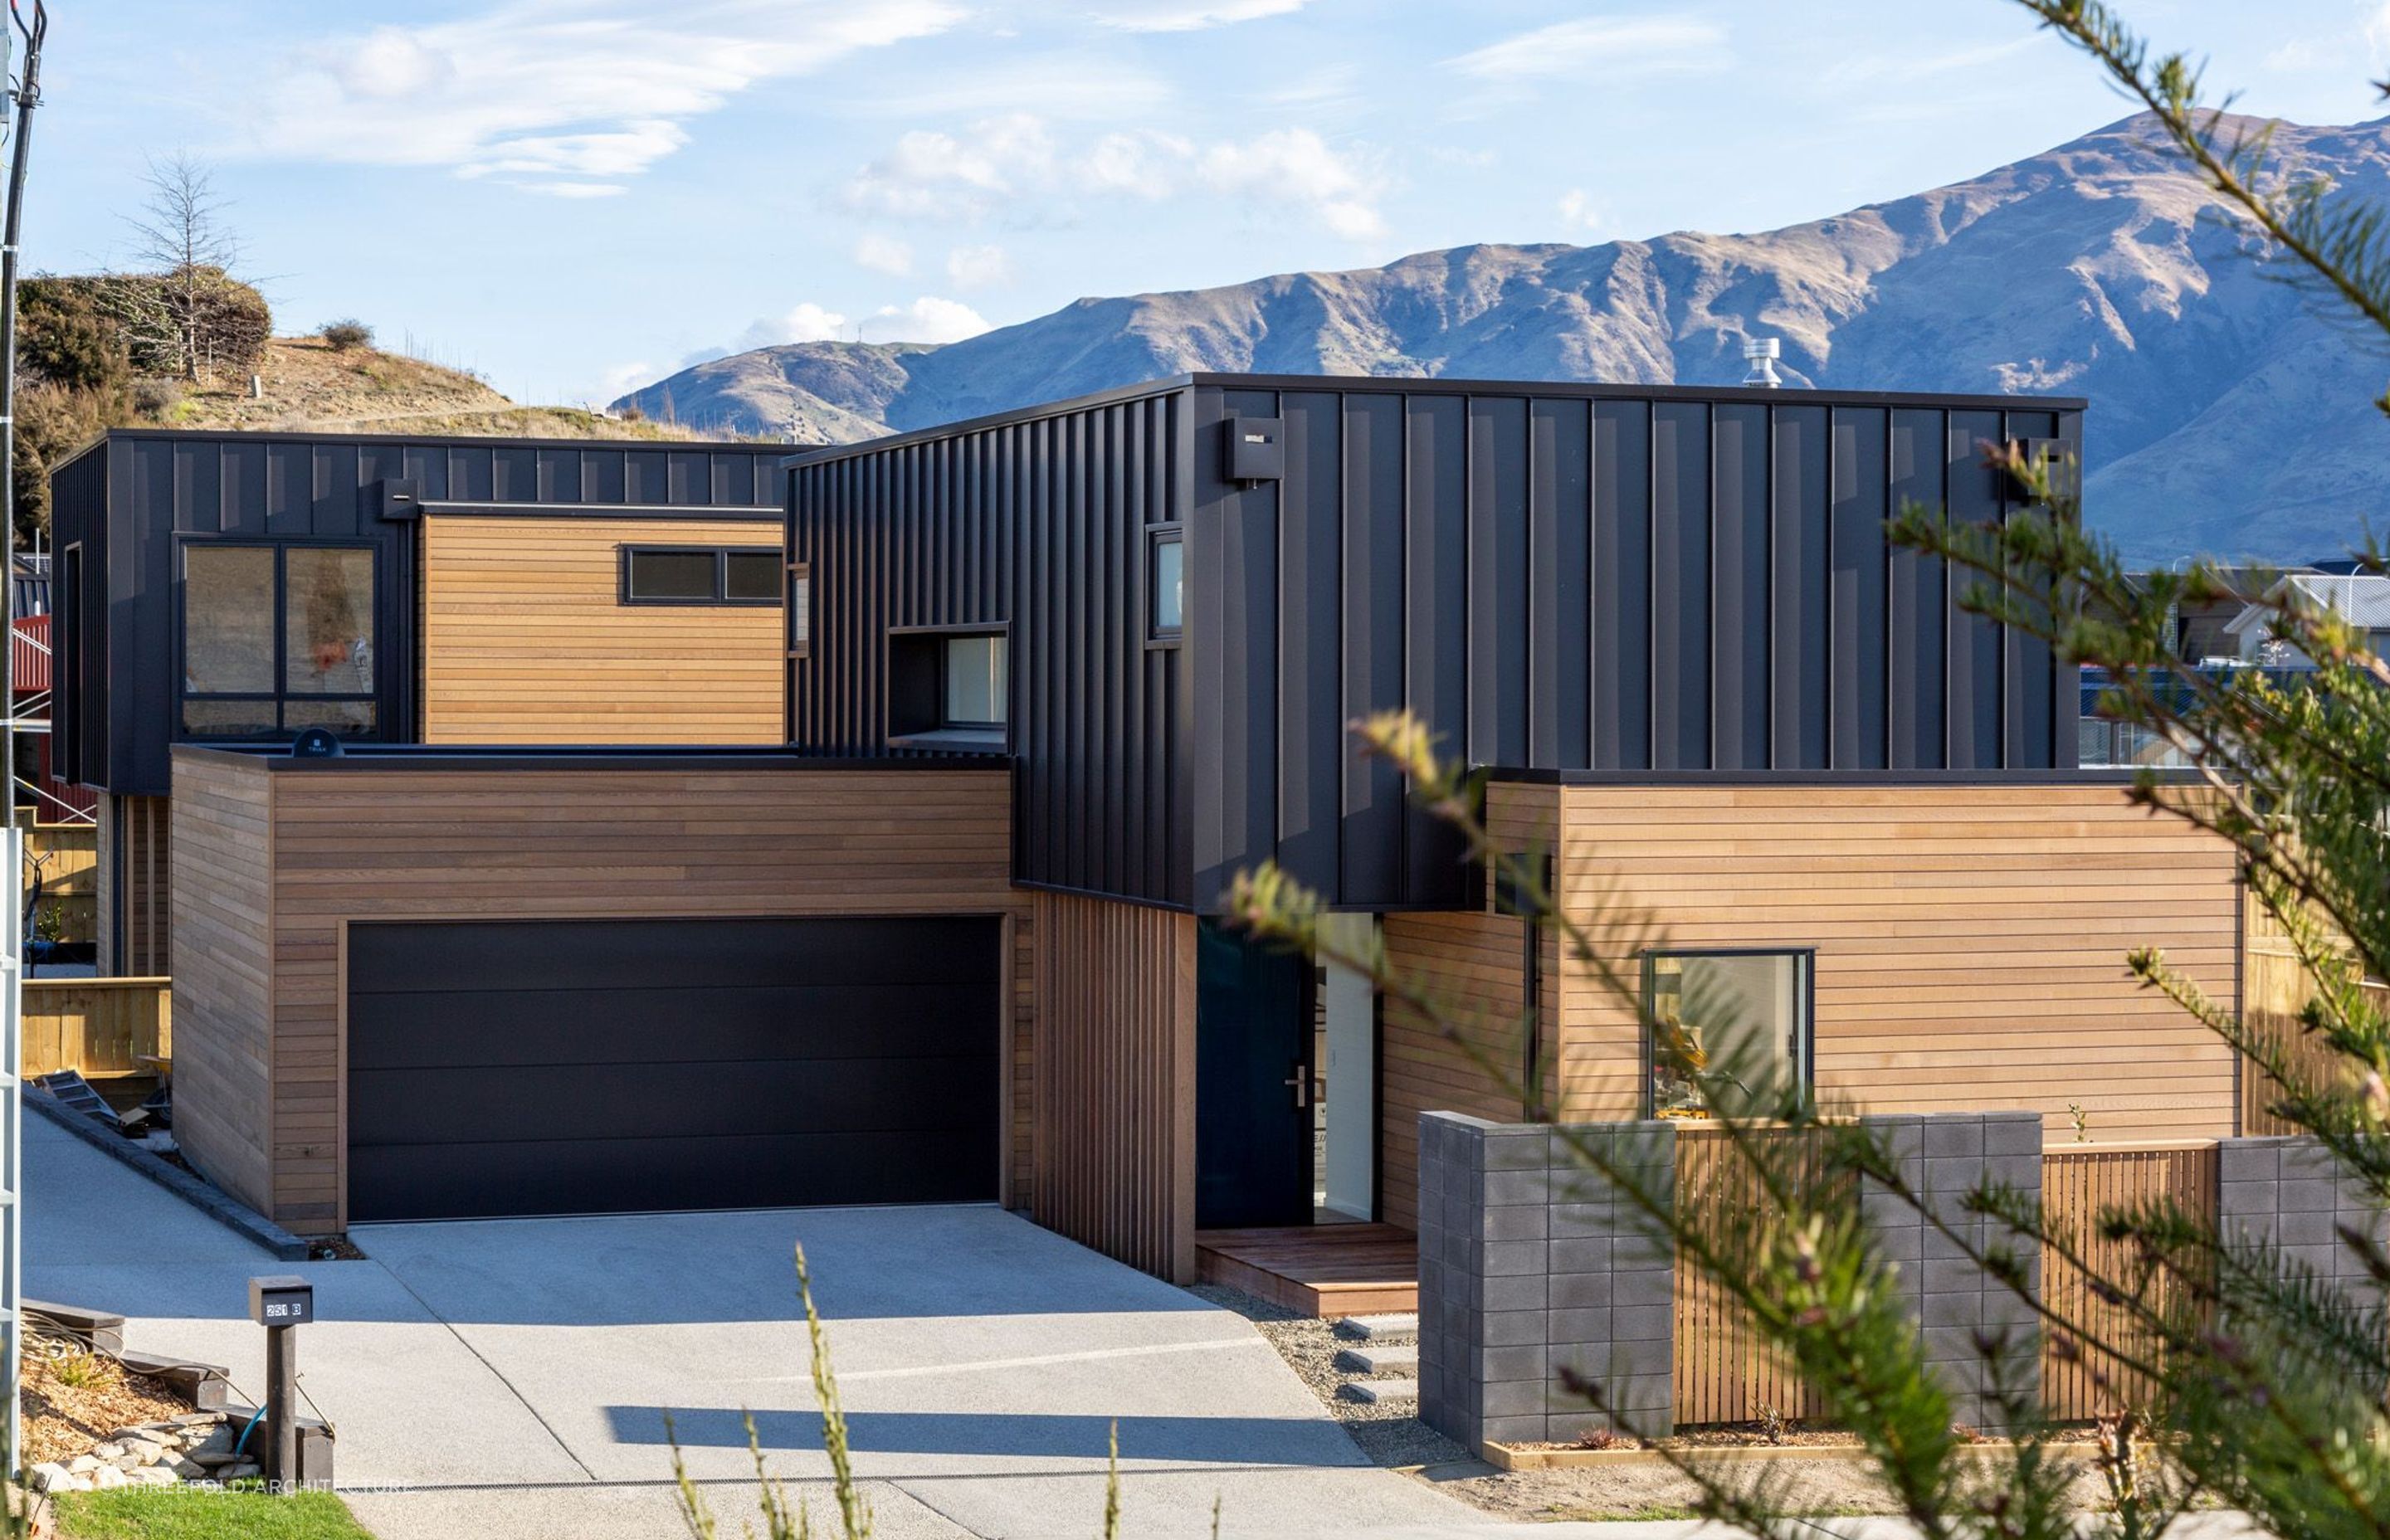 These Wanaka Townhouses represent the best of the very best of this style of home.